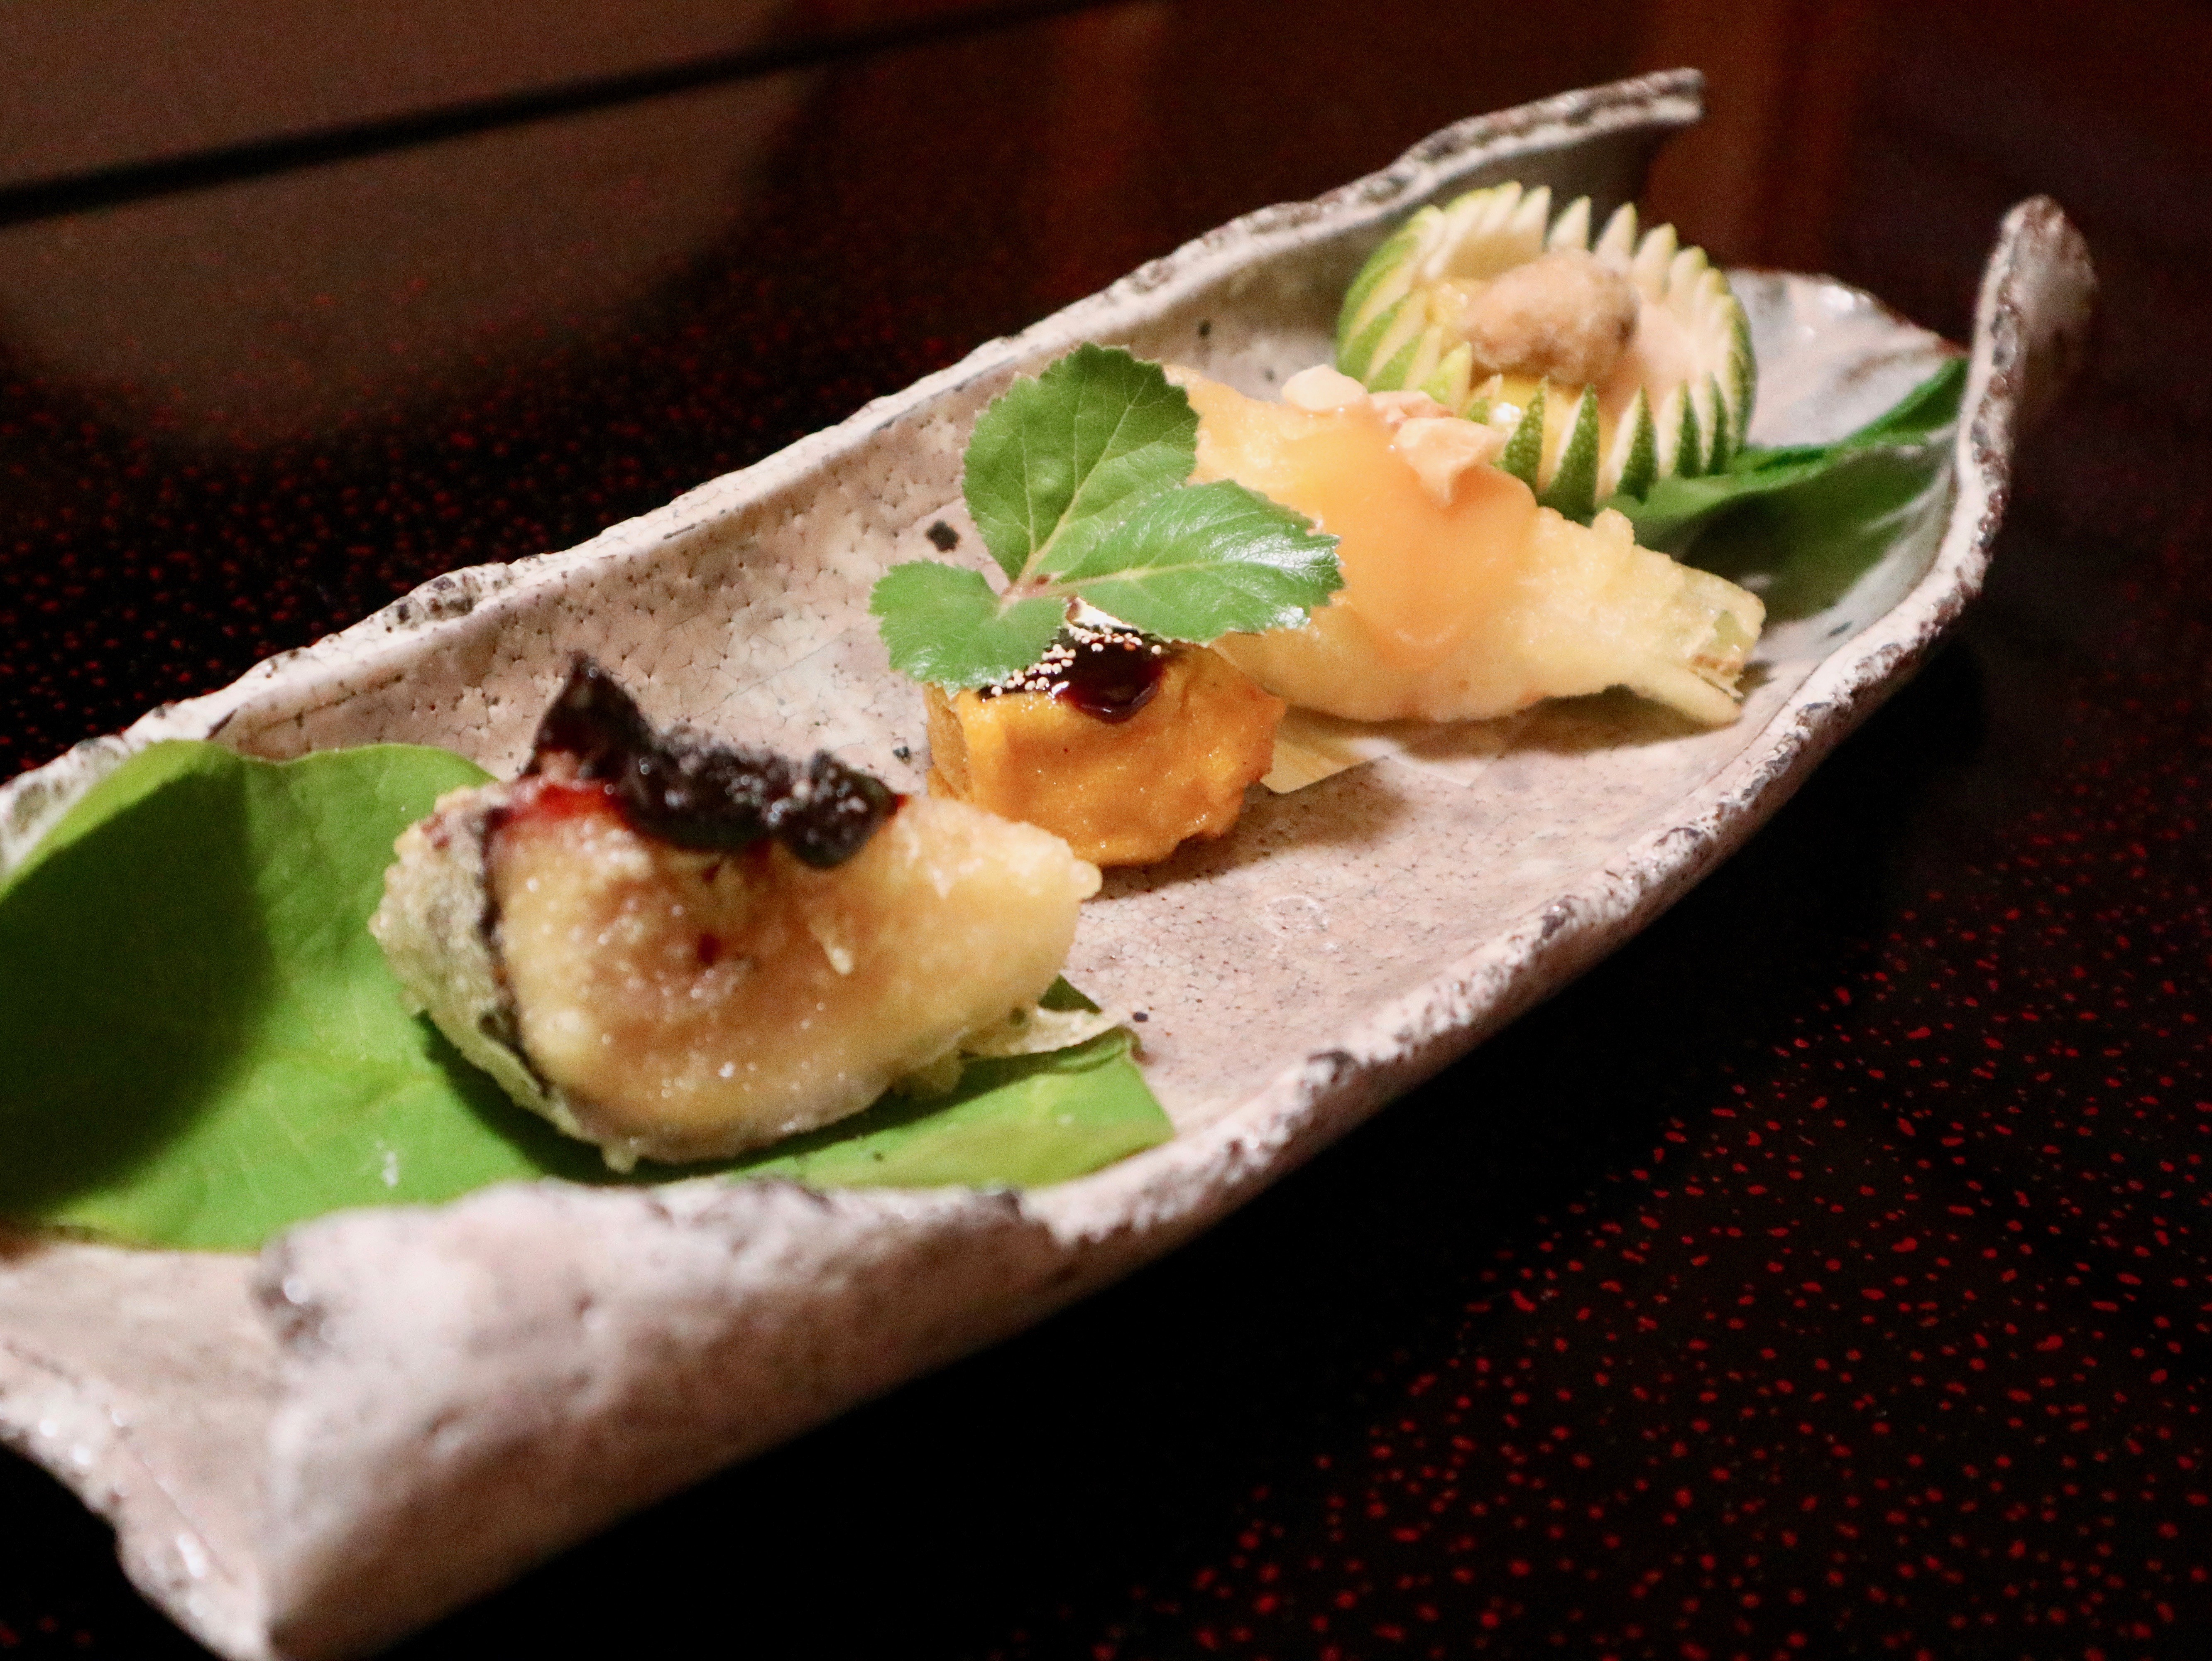 The sushi at Michelin-starred Ajiro is served with several side dishes and is elegantly prepared. Photo: Kayla Hill